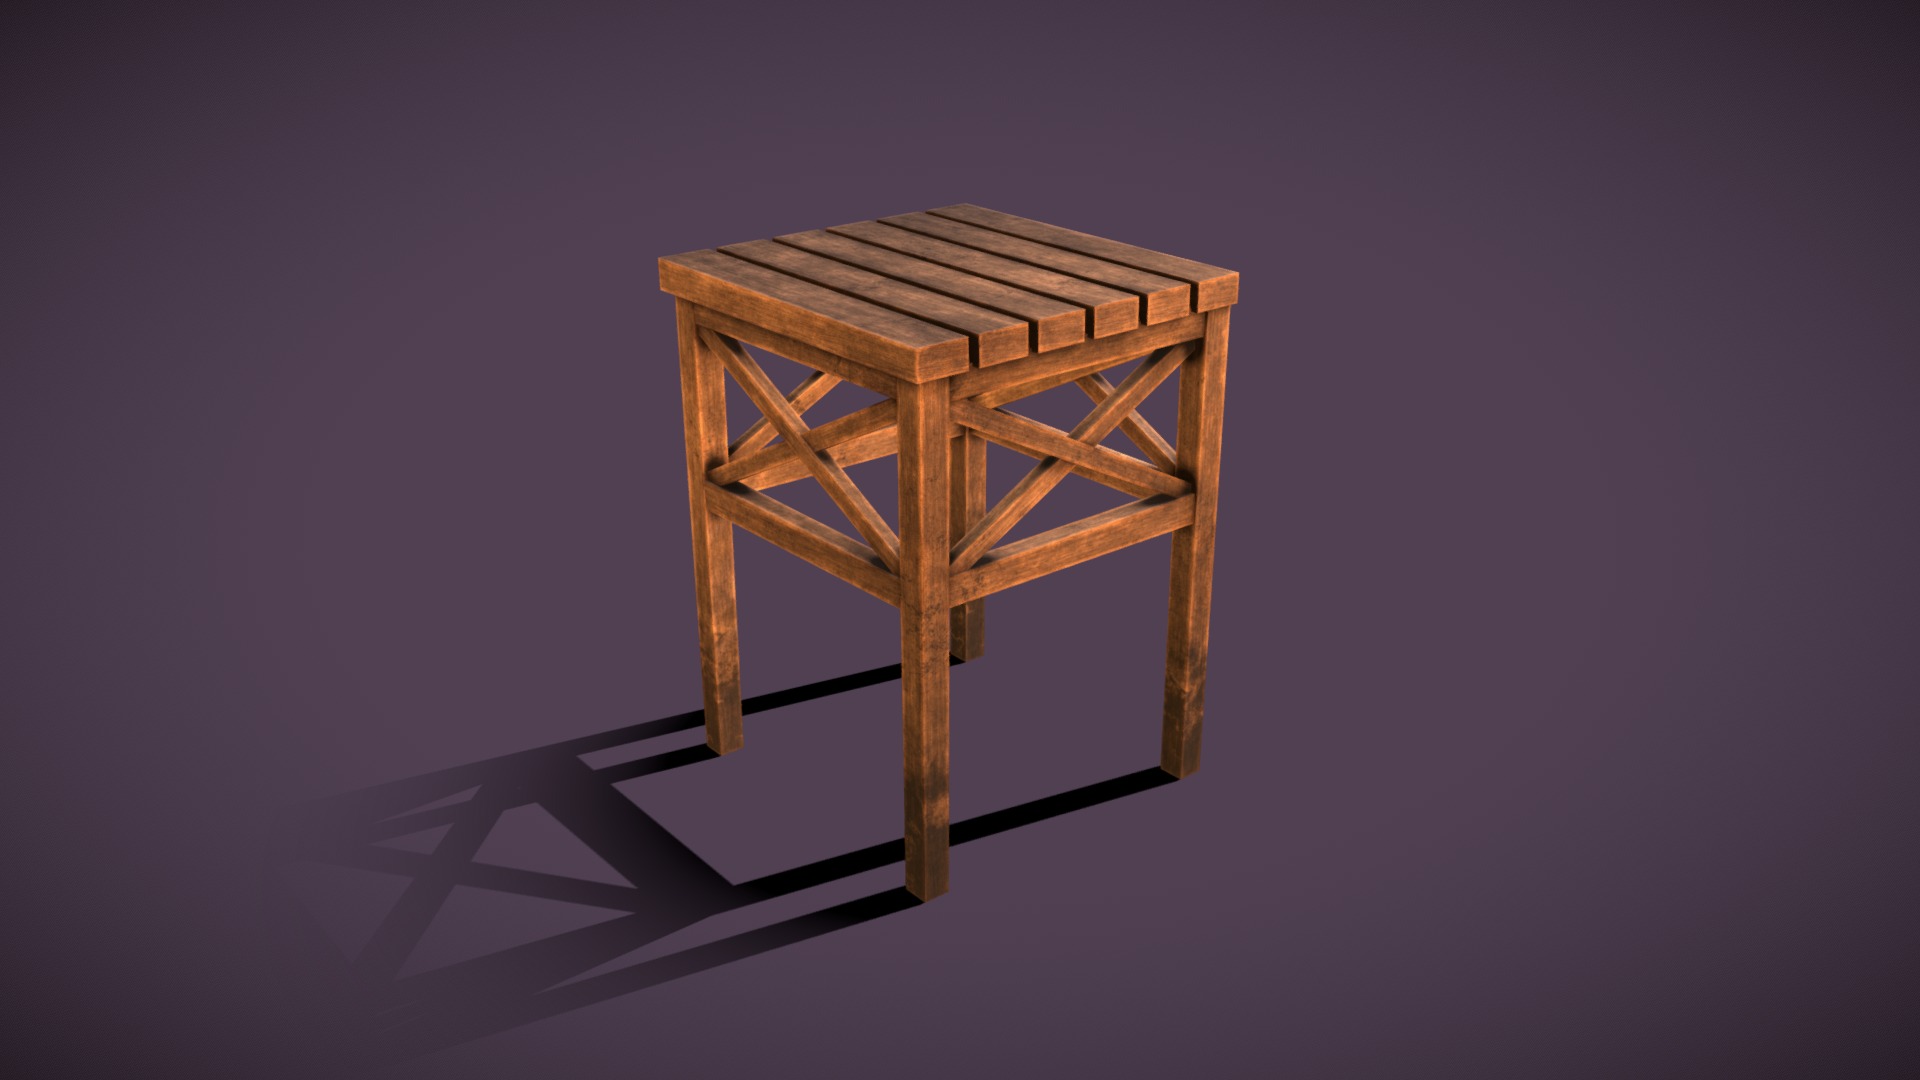 3D model Dirty Wood stool, Low poly - This is a 3D model of the Dirty Wood stool, Low poly. The 3D model is about a wooden chair on a stand.